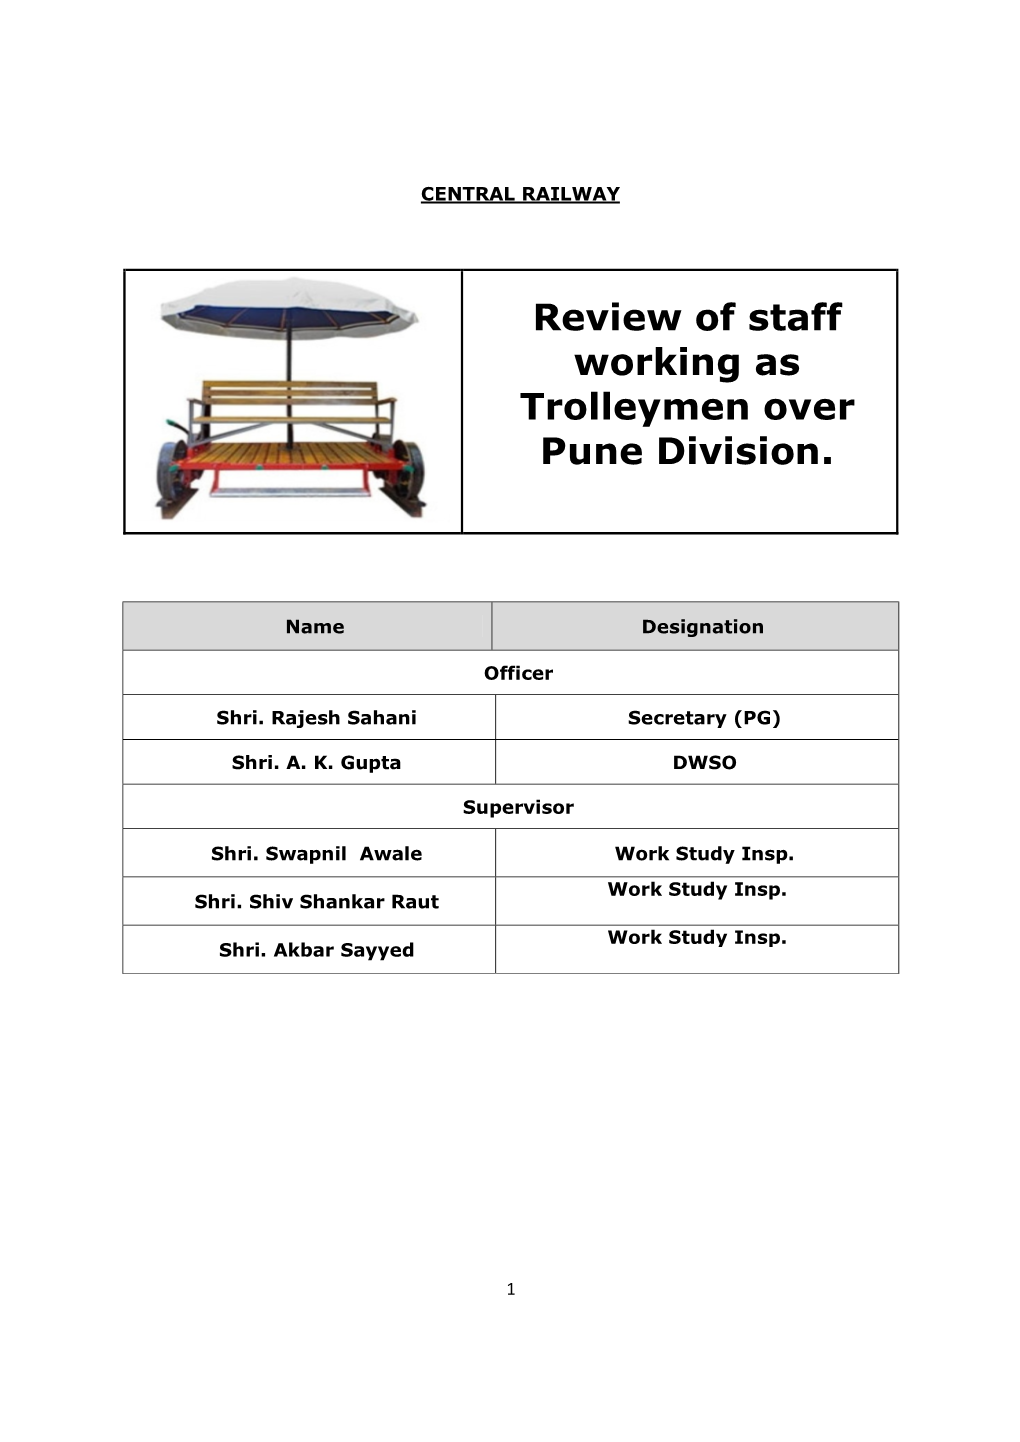 Review of Staff Working As Trolleymen Over Pune Division